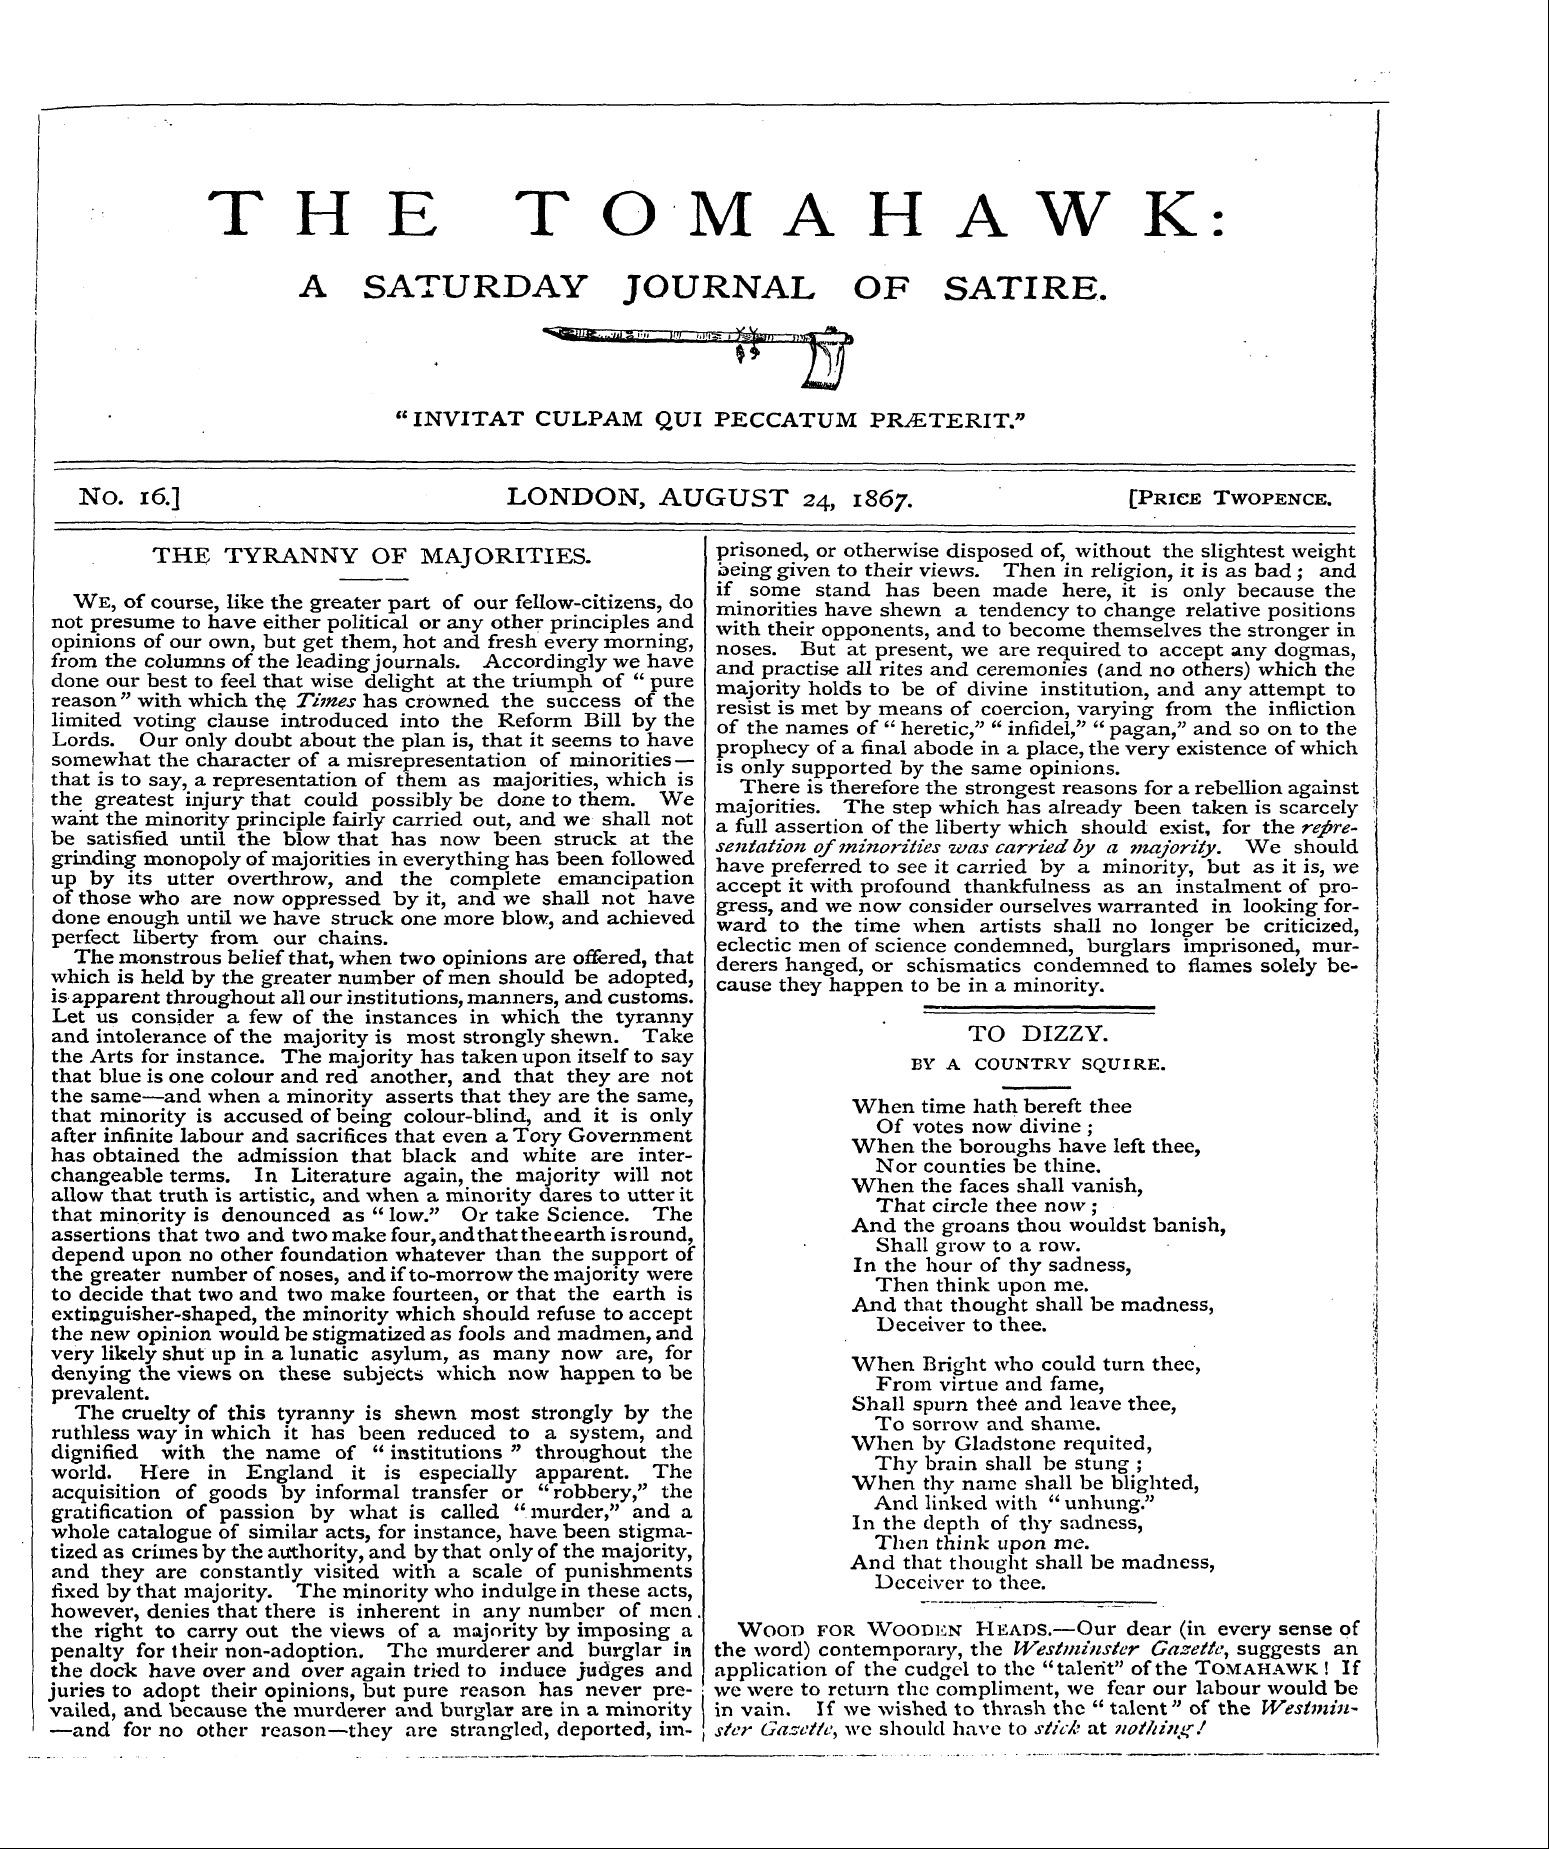 Tomahawk (1867-1870): jS F Y, 1st edition - ¦ ¦-¦ I The Tomahawk: A Saturday Journal...